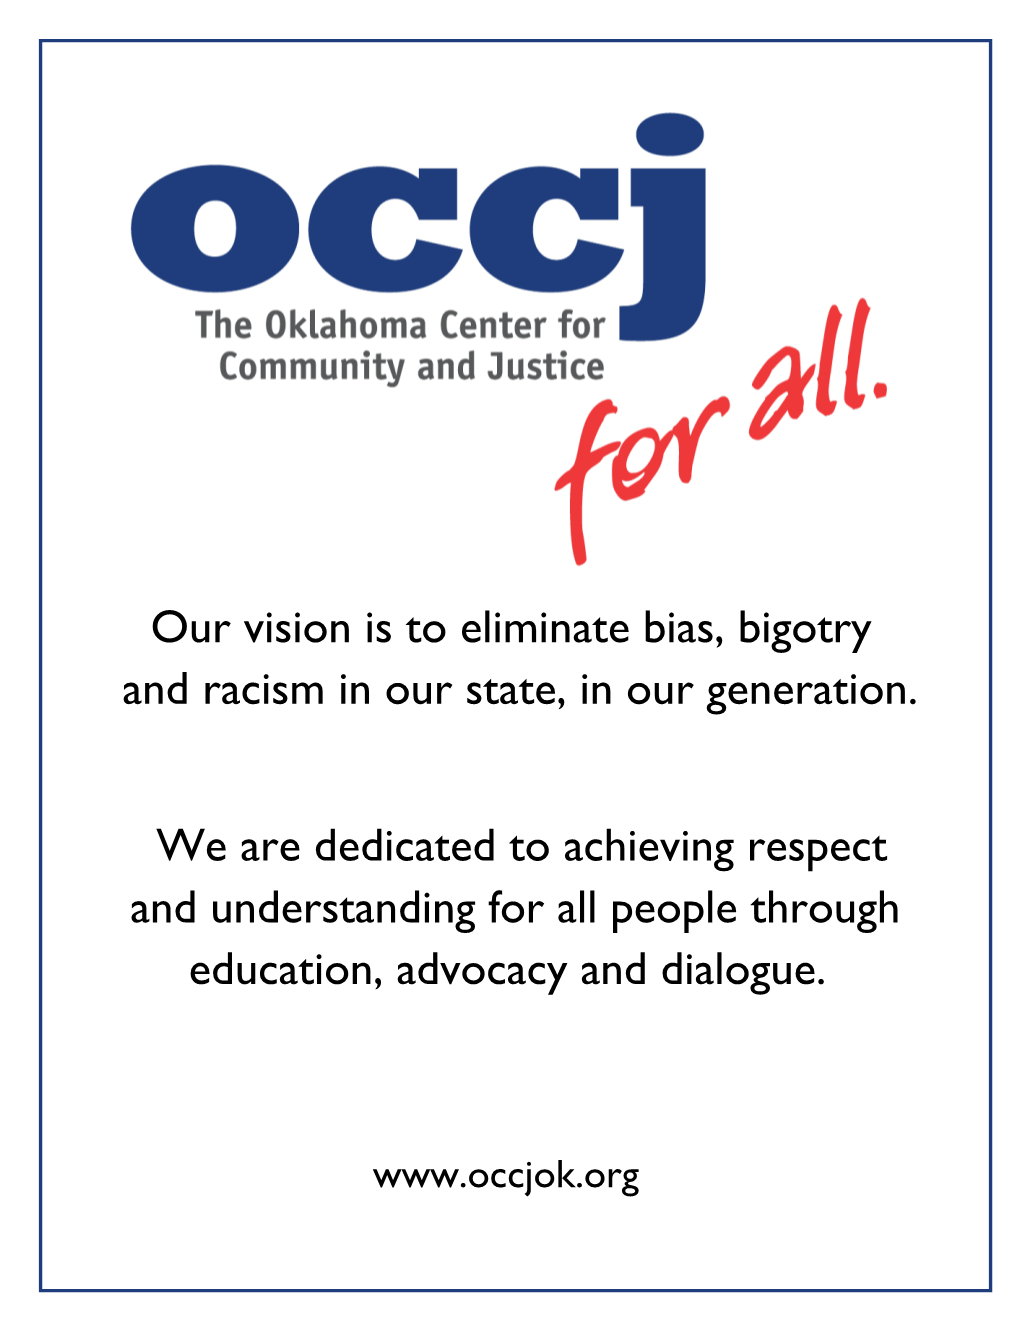 Our Vision Is to Eliminate Bias, Bigotry and Racism in Our State, in Our Generation